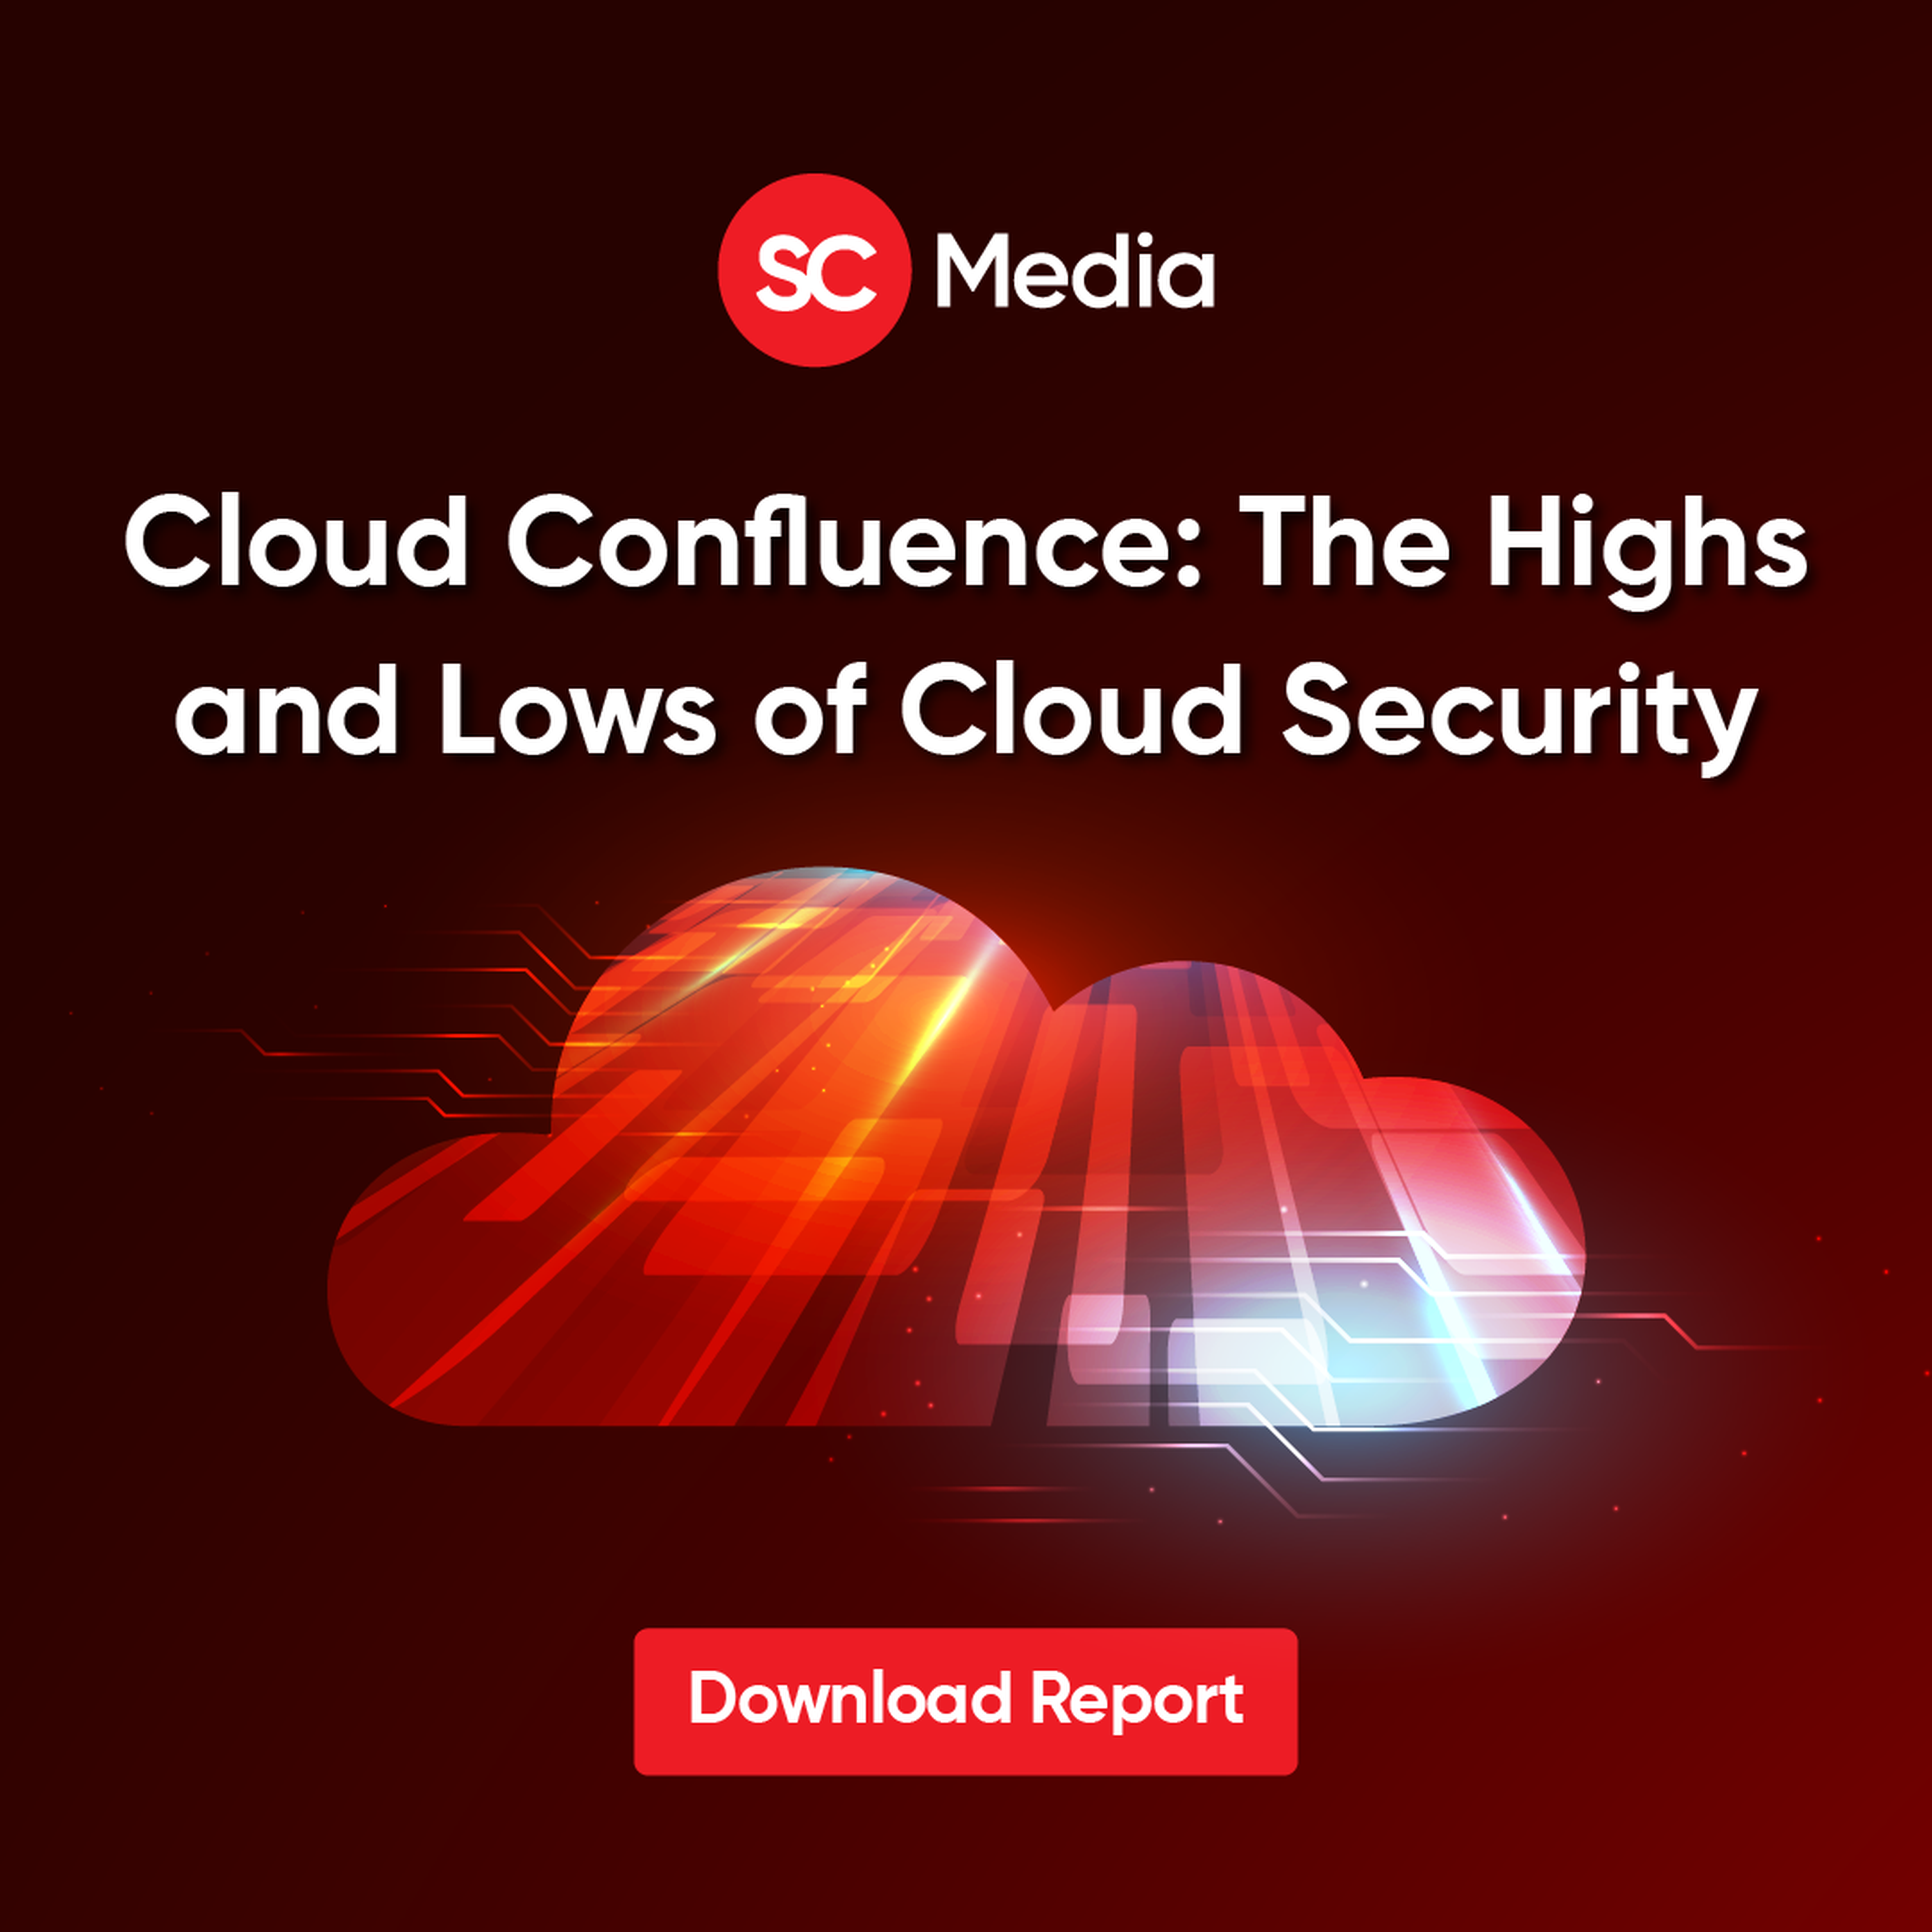 Cloud Confluence: The Highs and Lows of Cloud Security